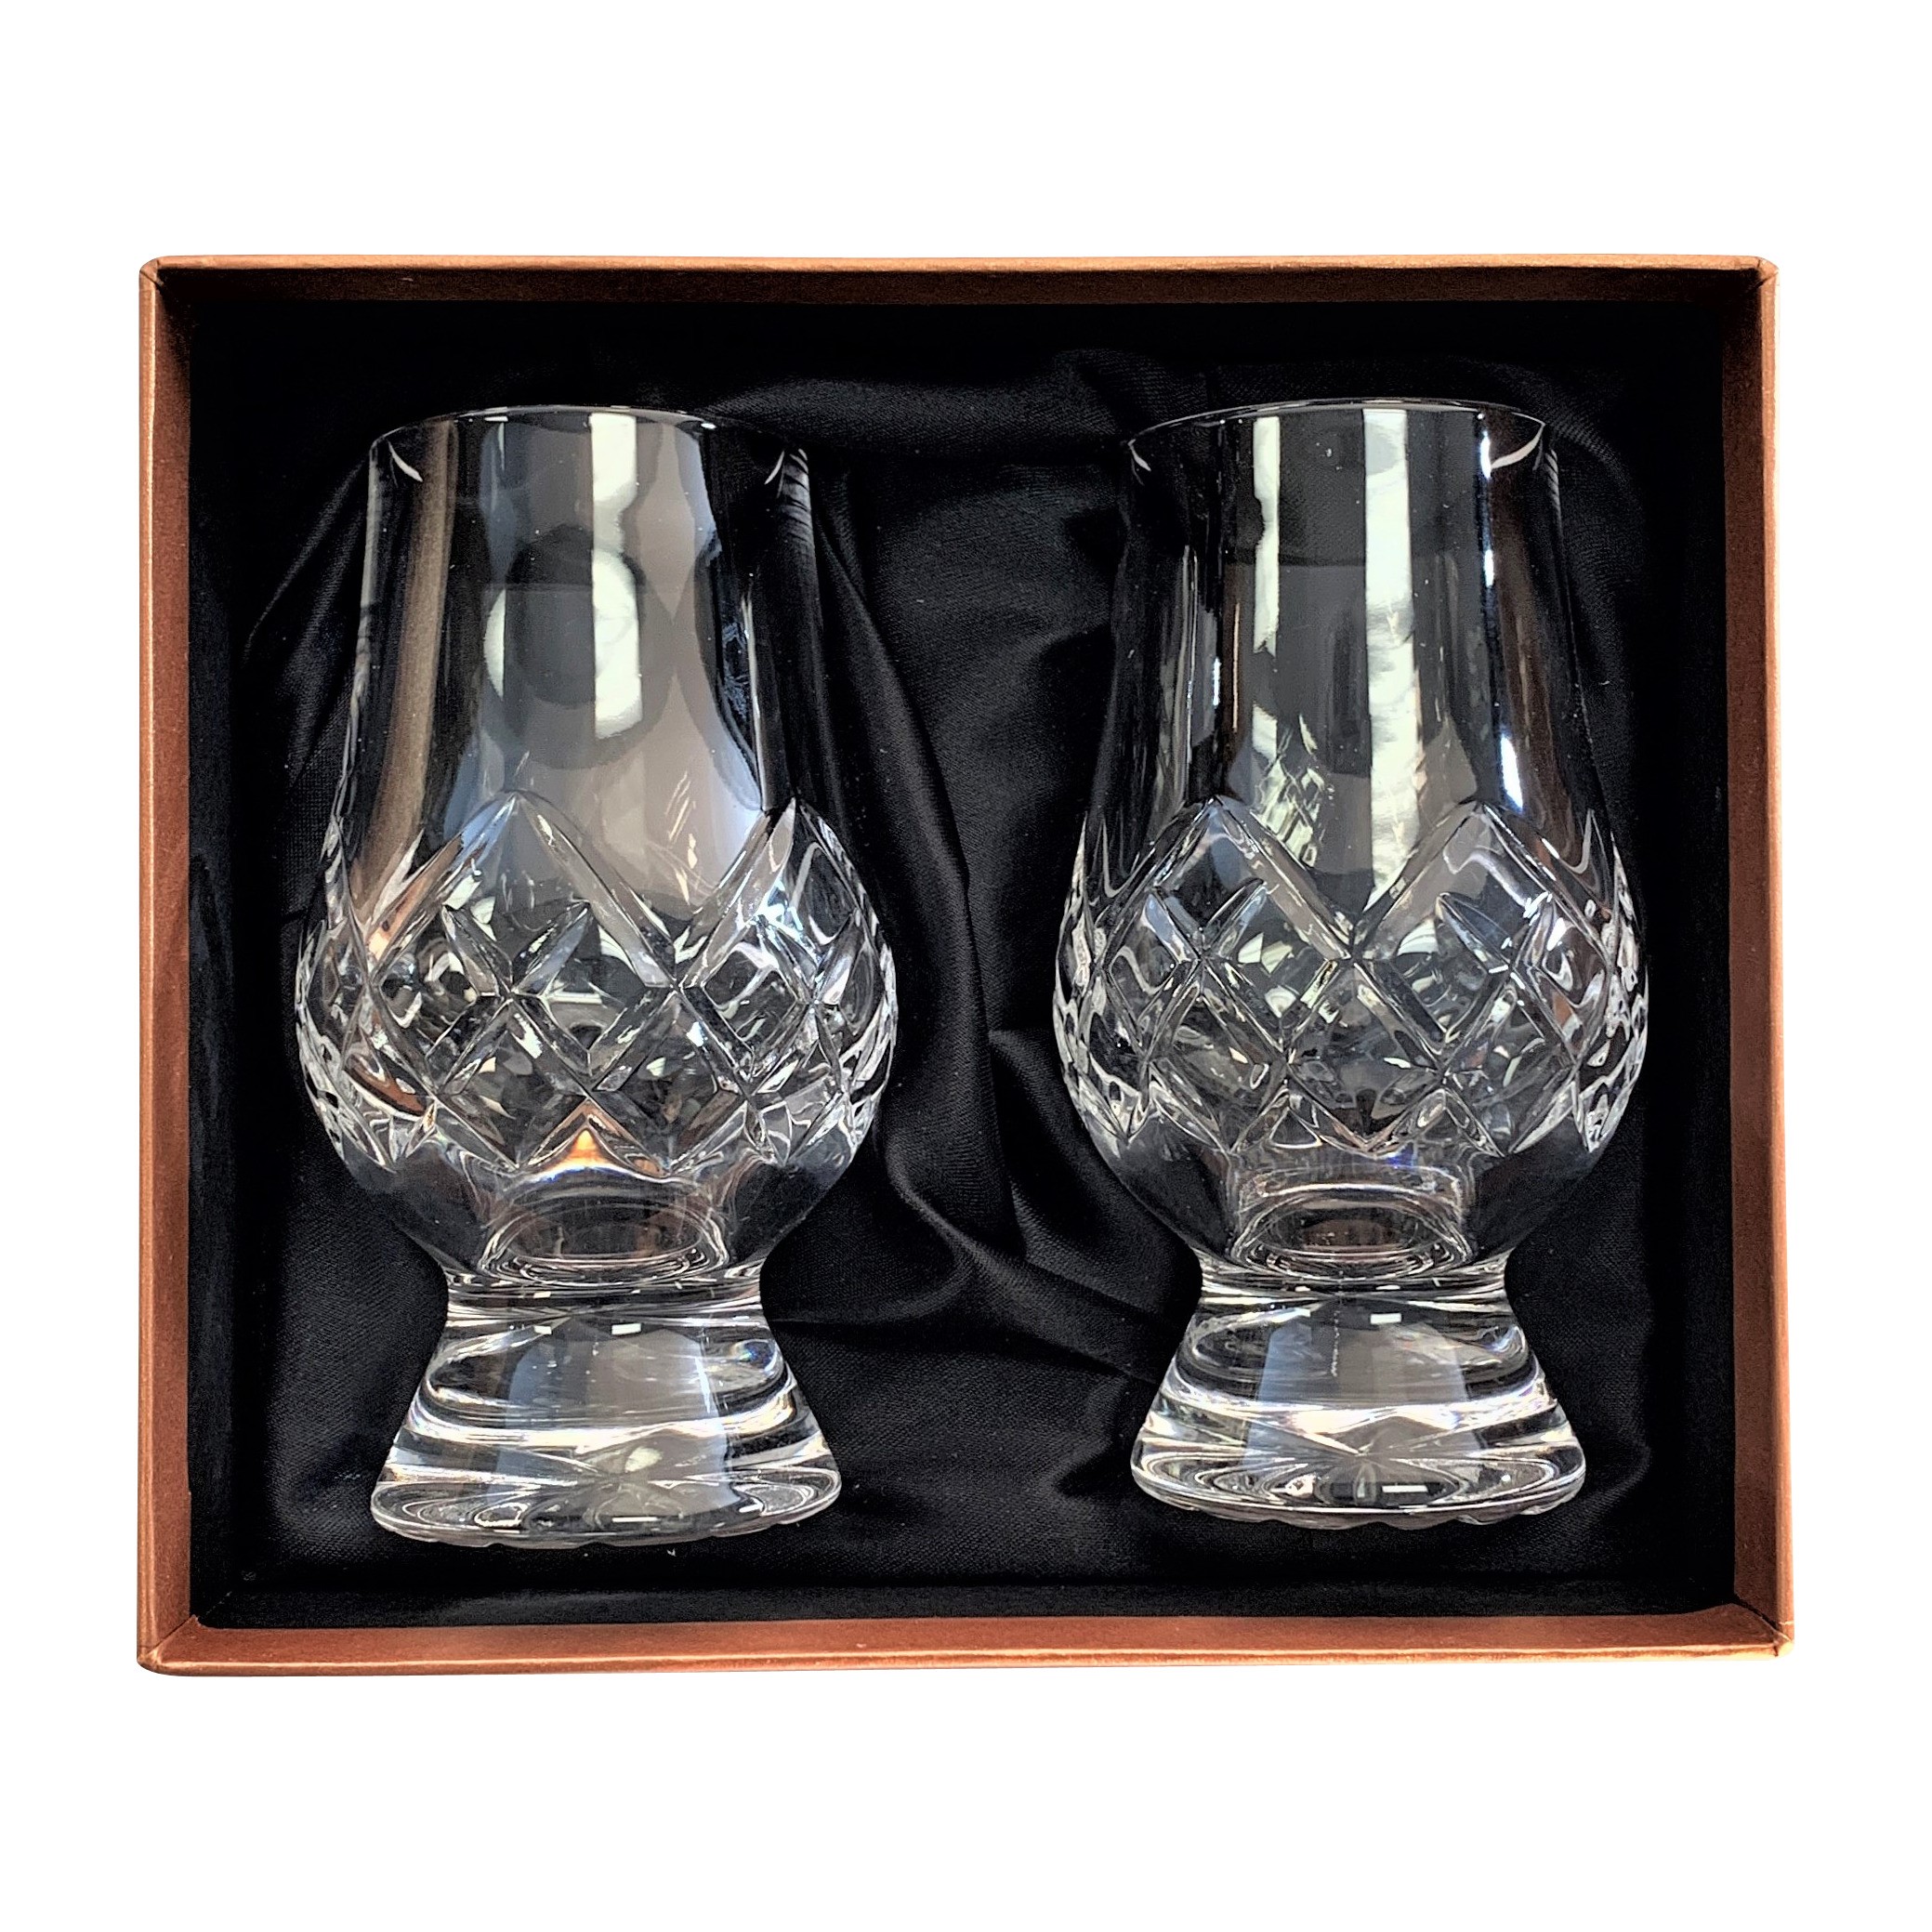 Presentation Box Set of 2 The Glencairn Official Cut Crystal Whisky Glass 